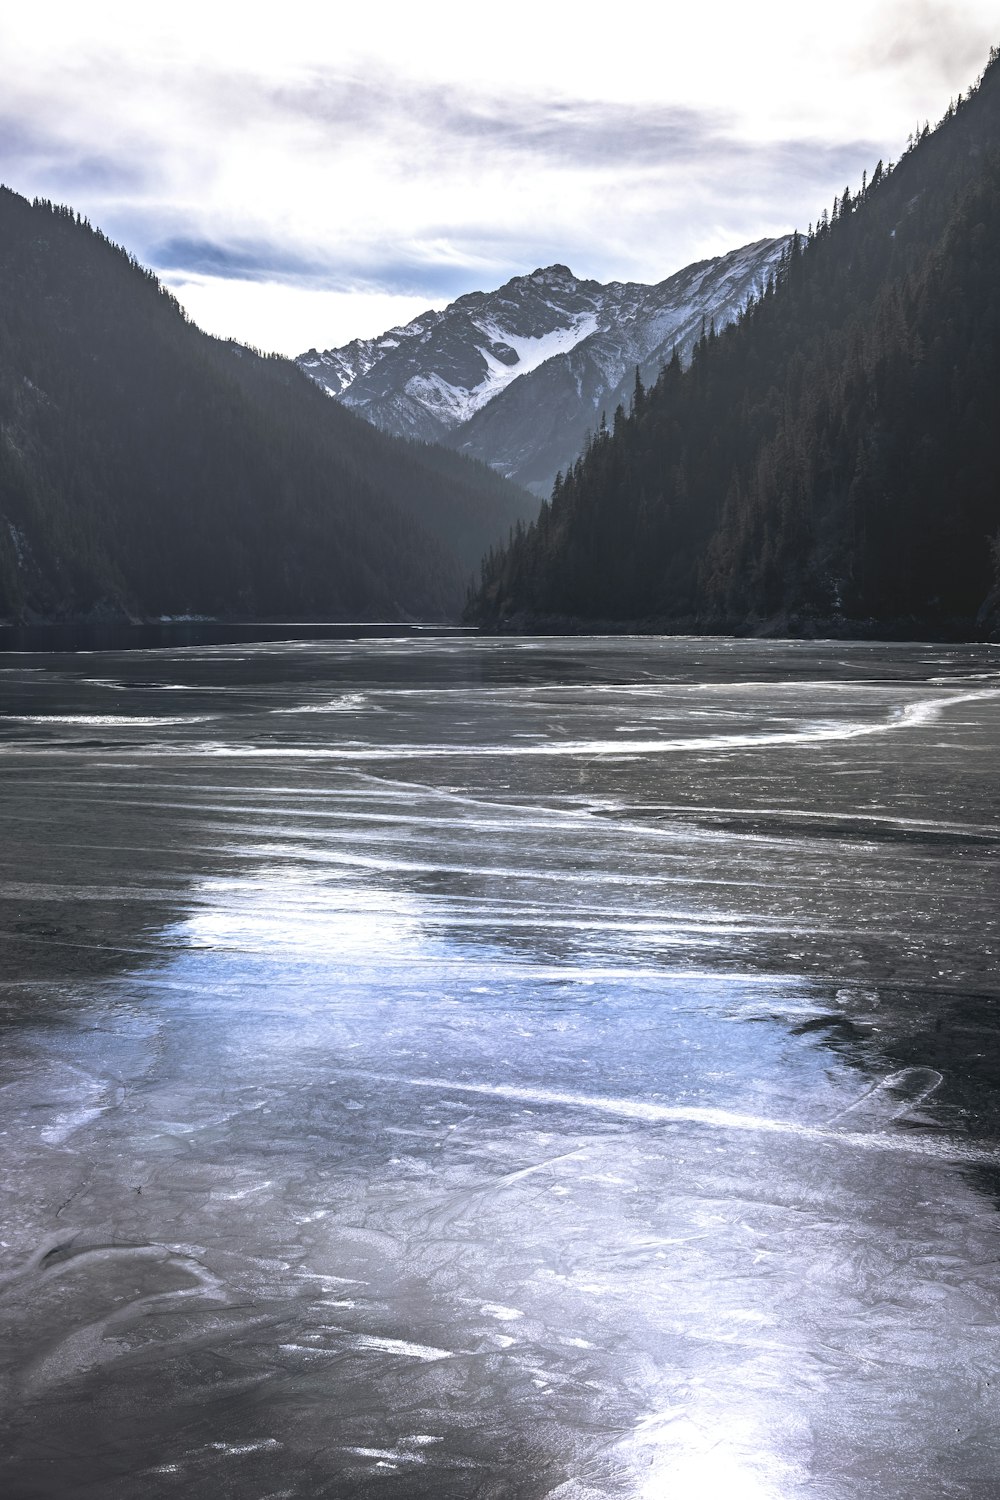 a frozen lake with mountains in the background